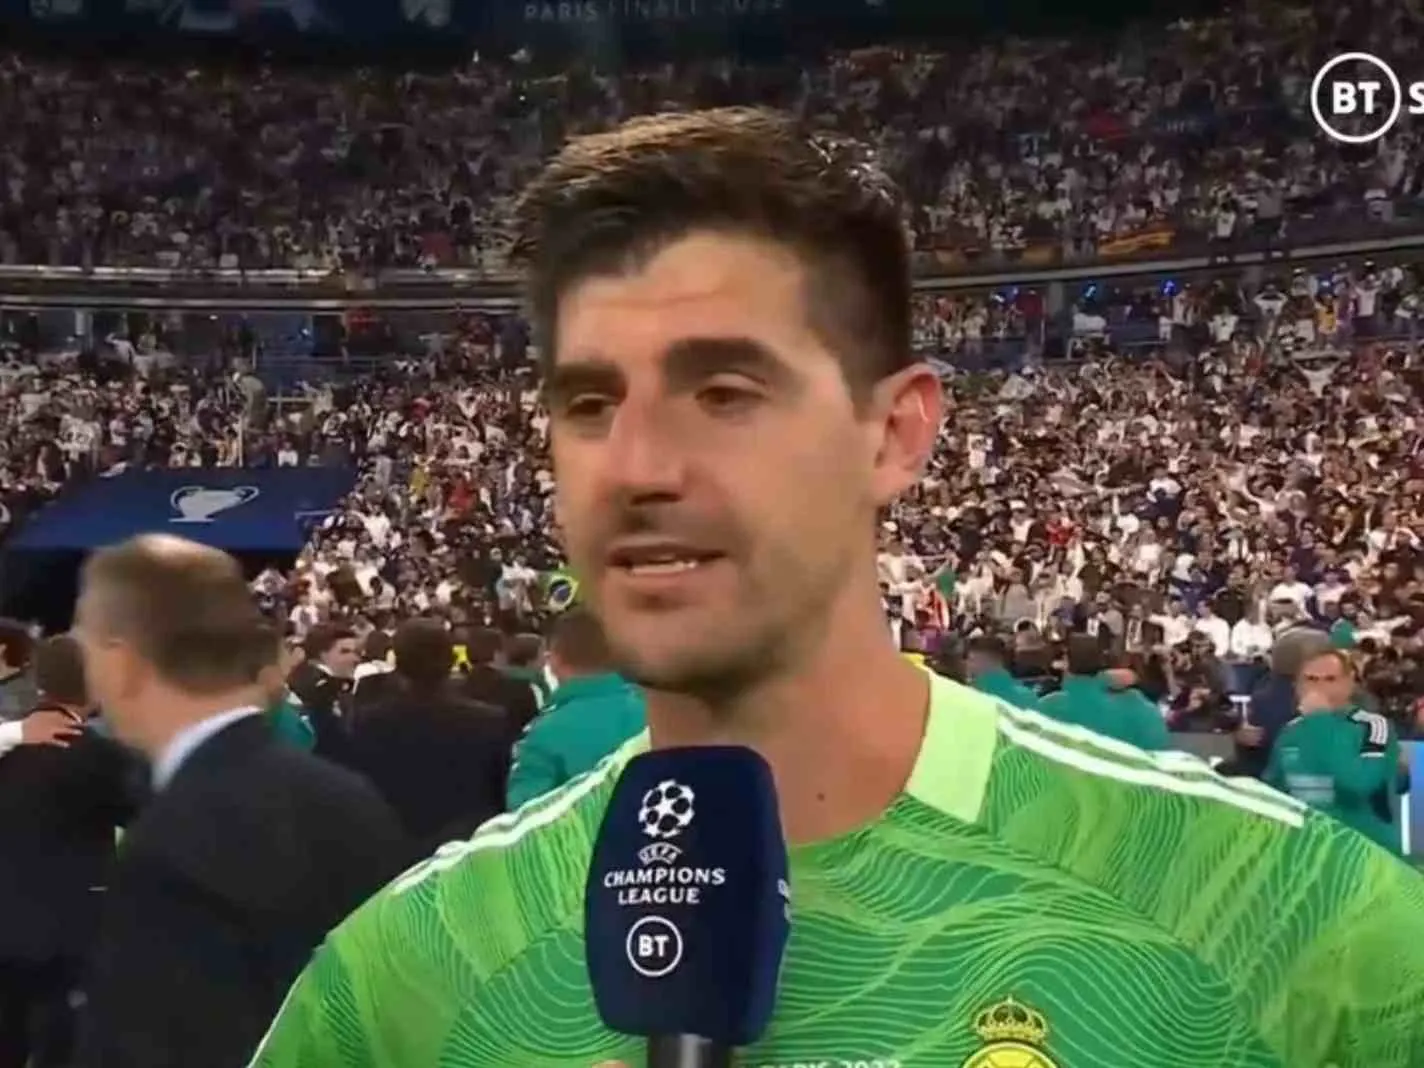 Thibaut Courtois during an interview after UEFA Champions League final between Real Madrid and Liverpool at Paris.